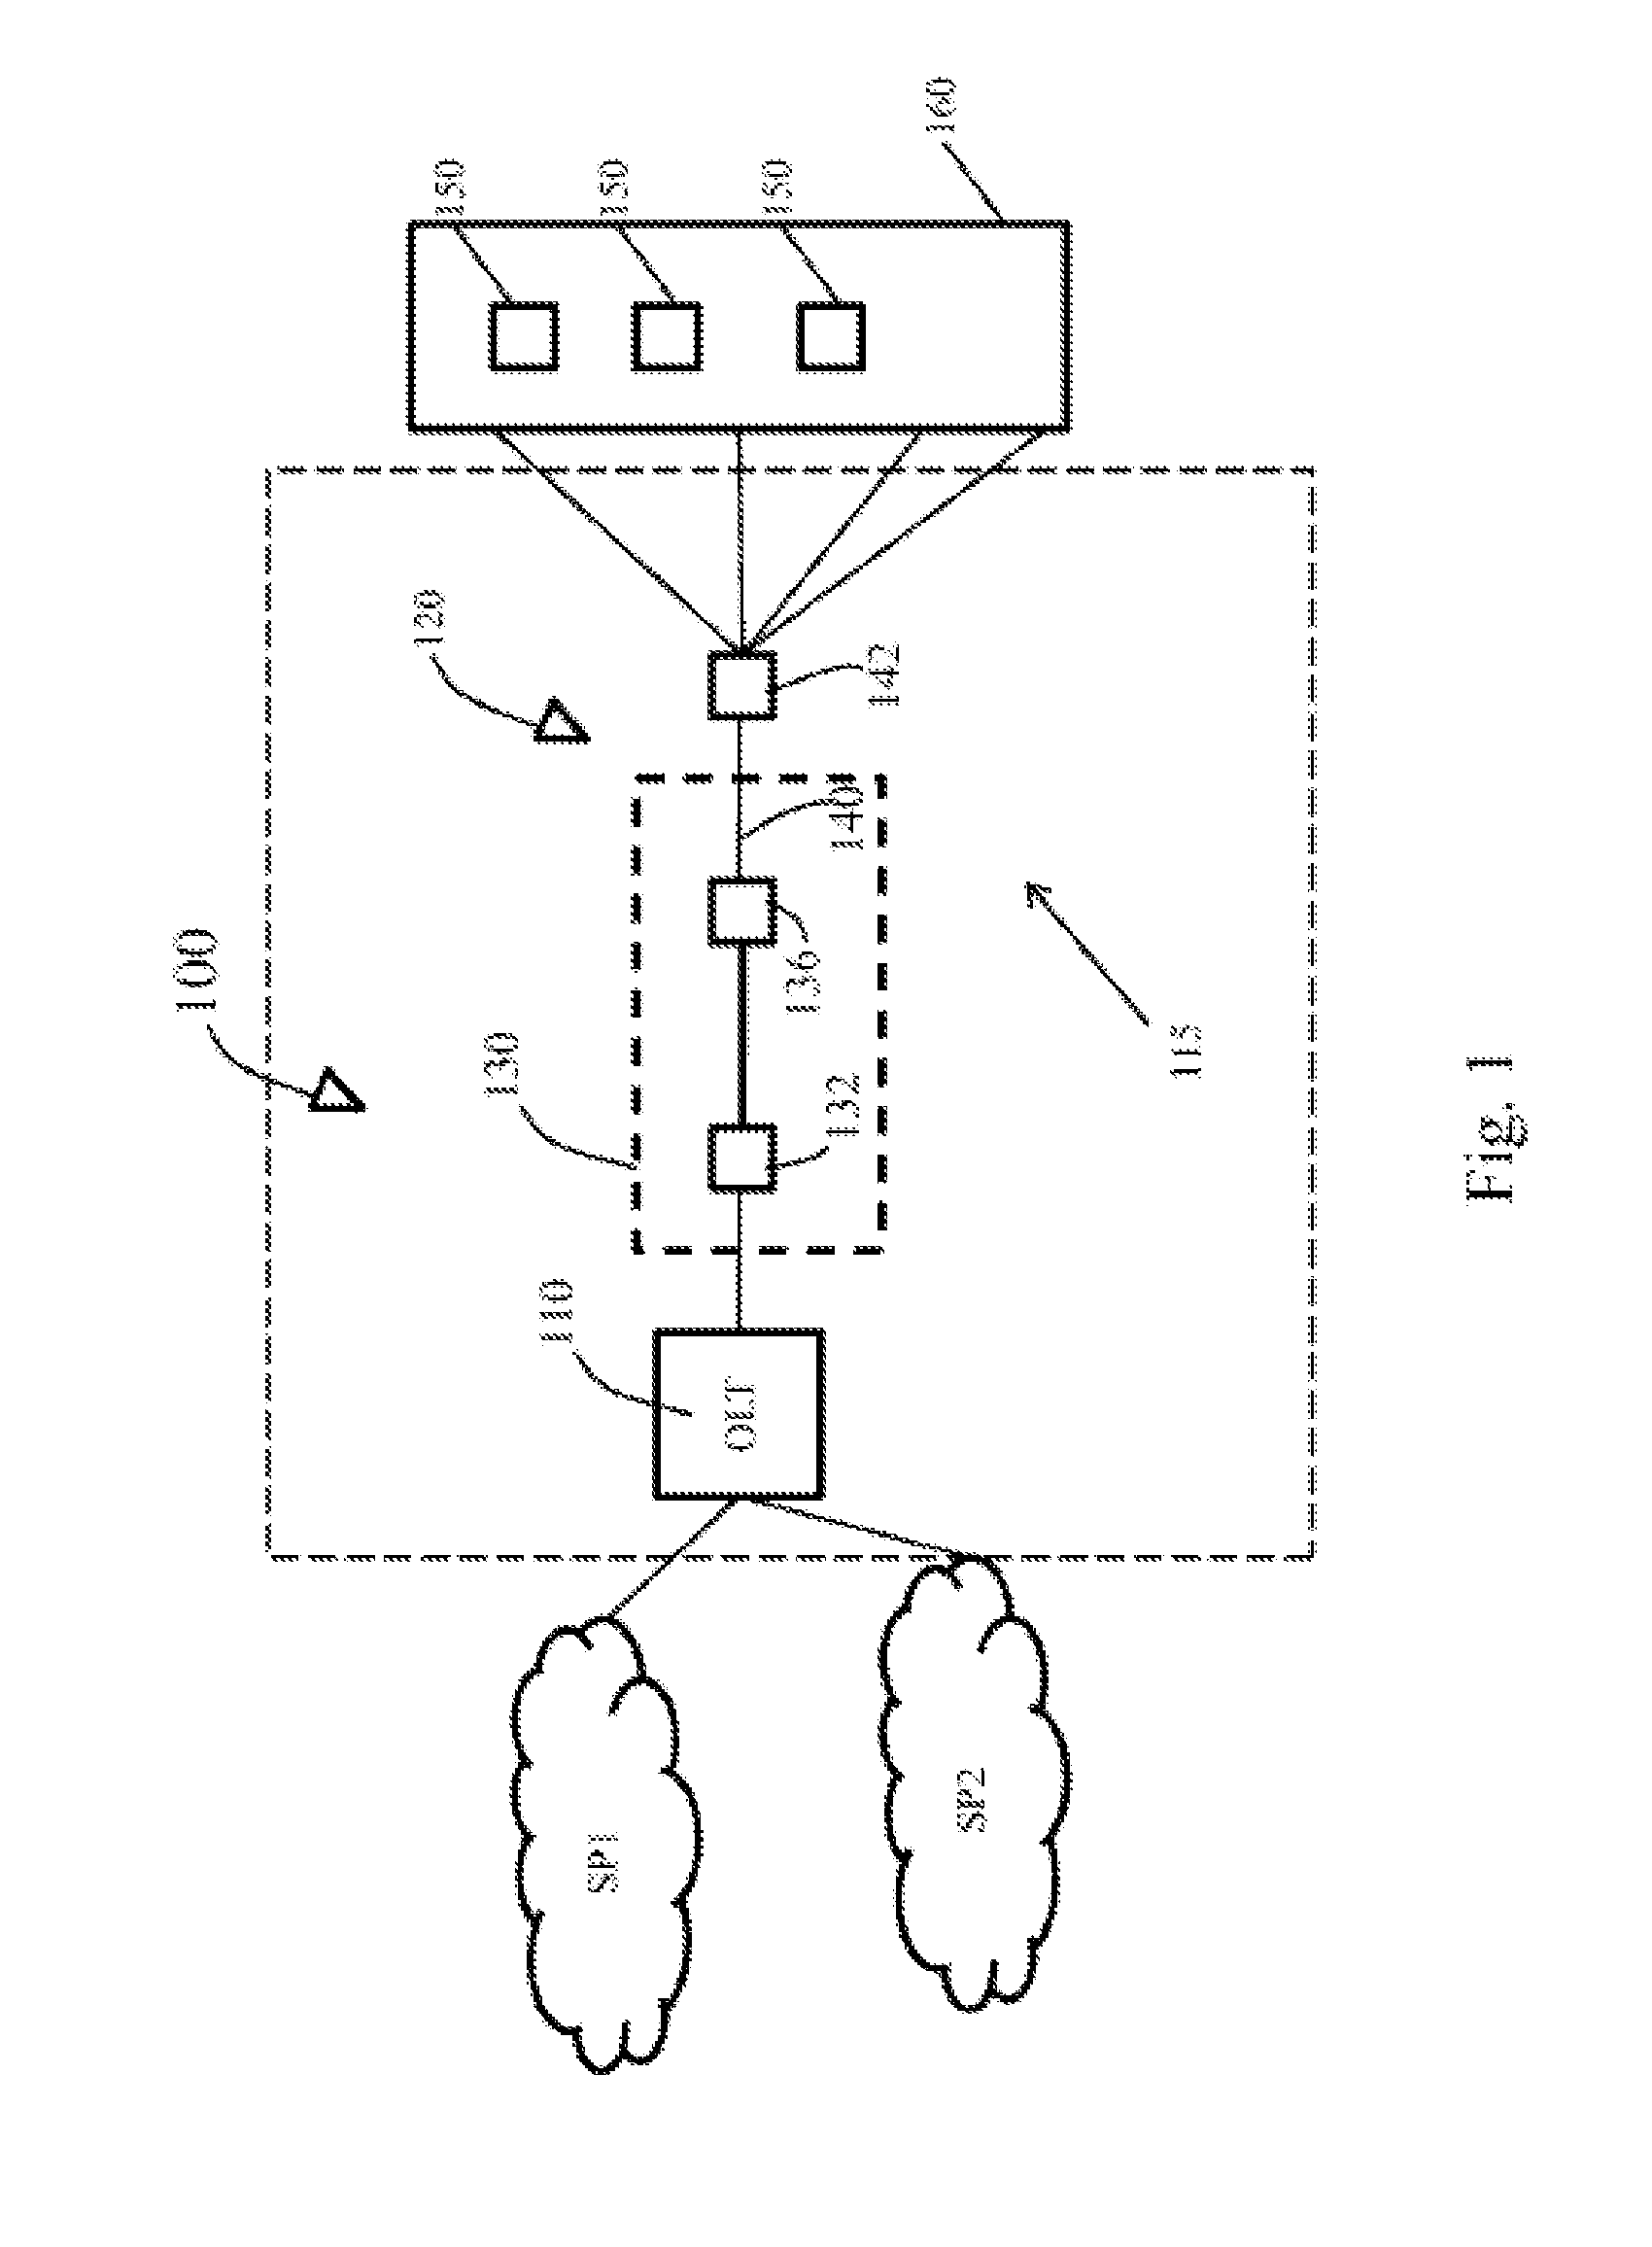 System and method for providing resilience in communicaton networks